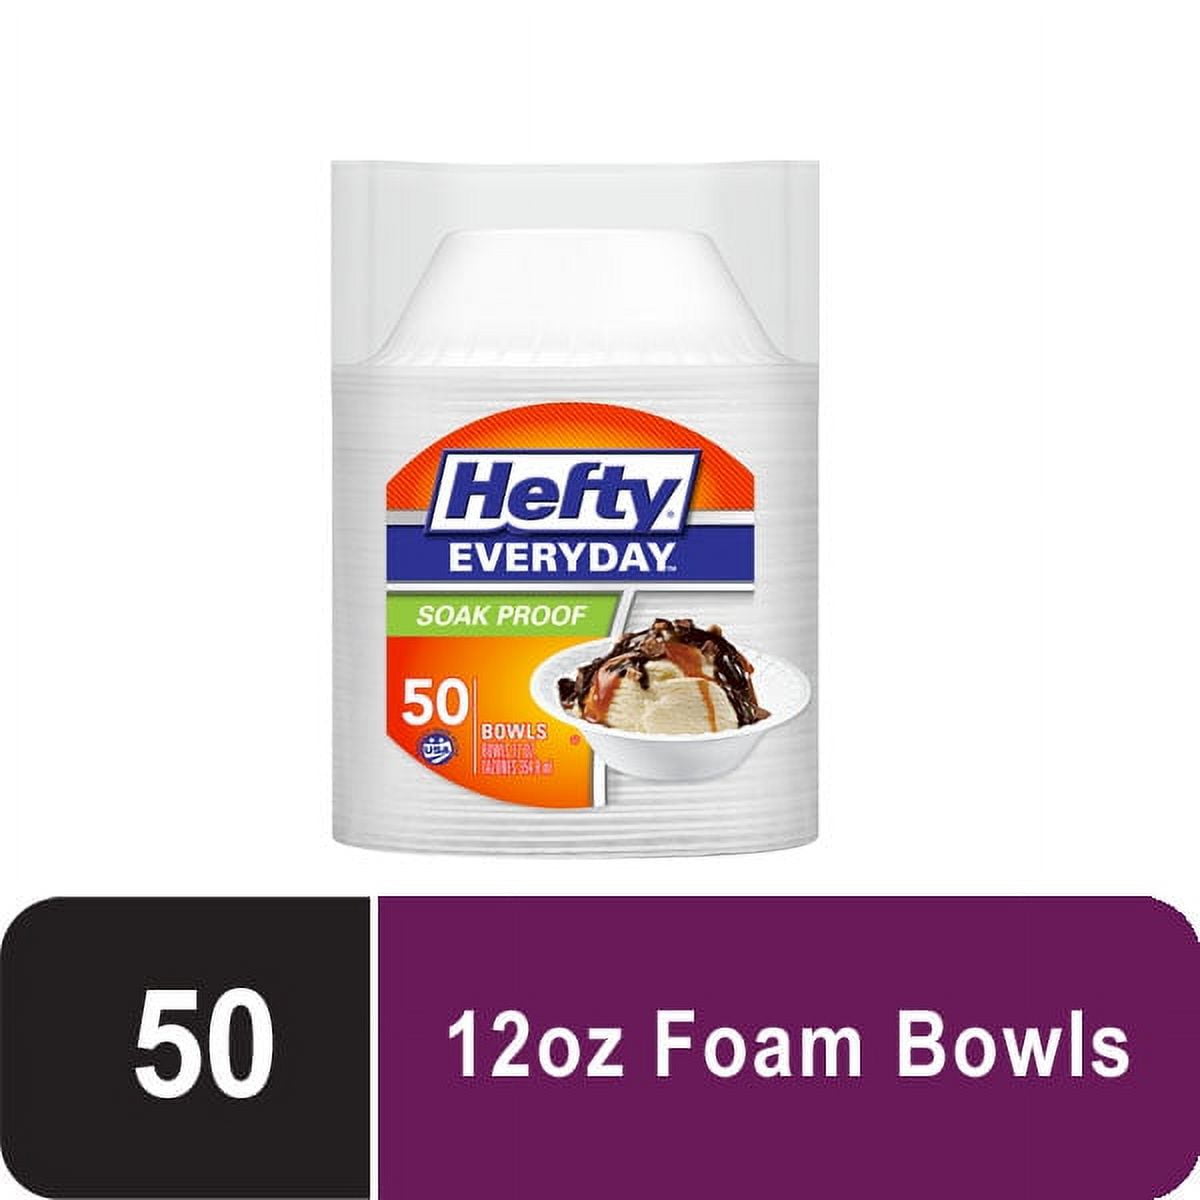 Stock Your Home Plastic Party Bowls (50 Pack) 12 Oz Elegant